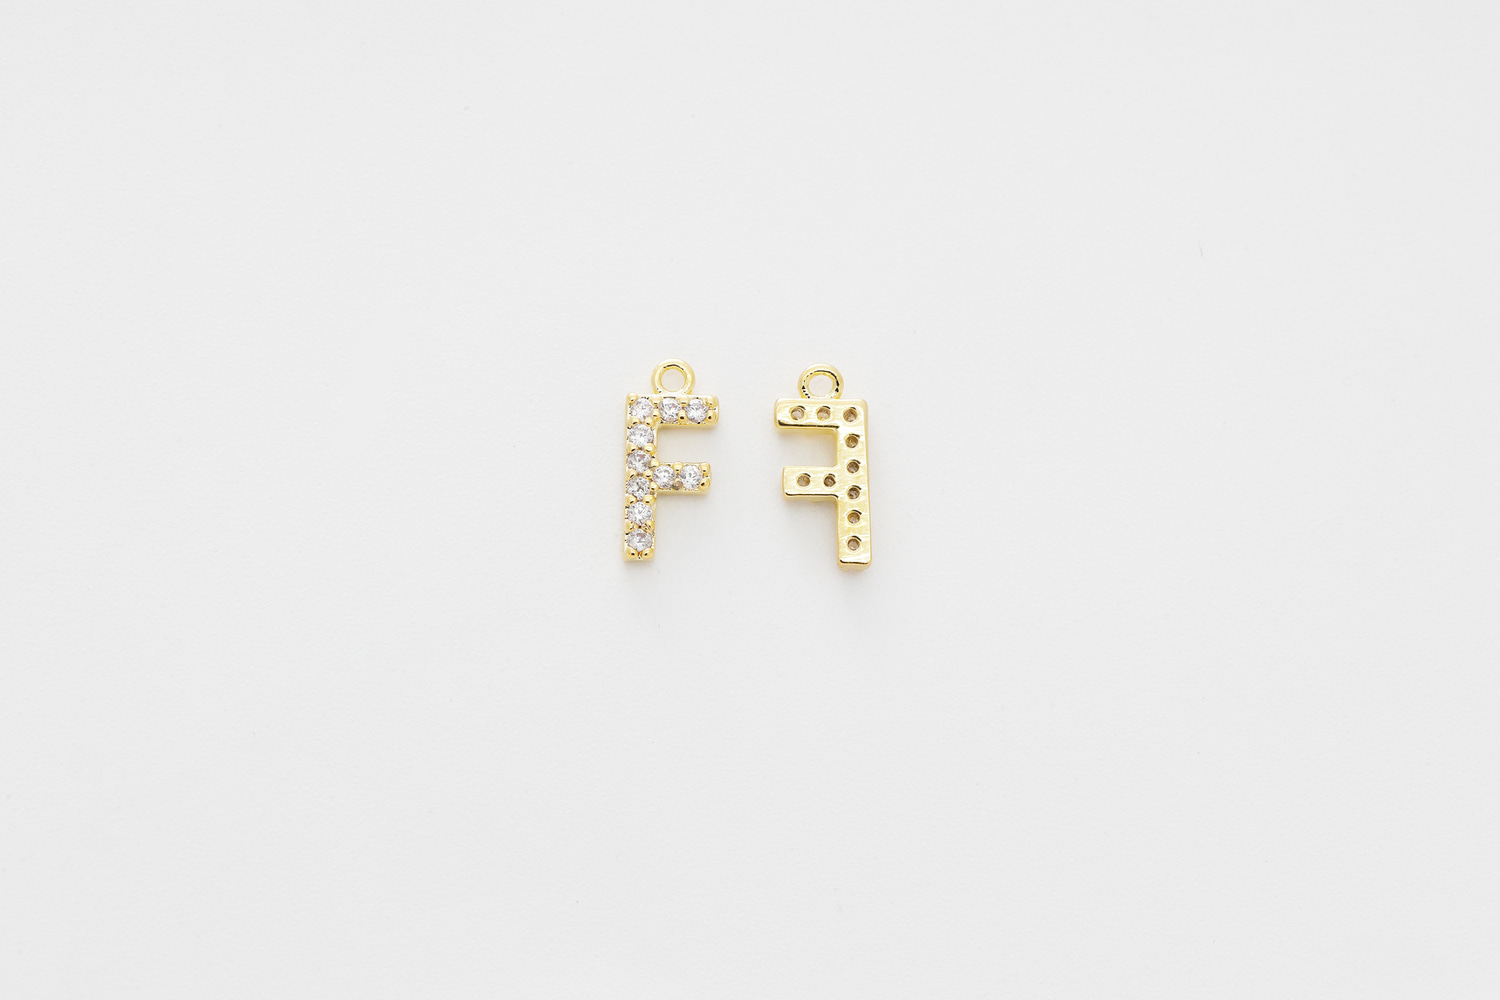 [AF-G20] Cubic capital letter charm F, Brass, Cubic zirconia, Nickel free, Jewelry making supplies, Alphabet charm, Initial charm, 1 piece